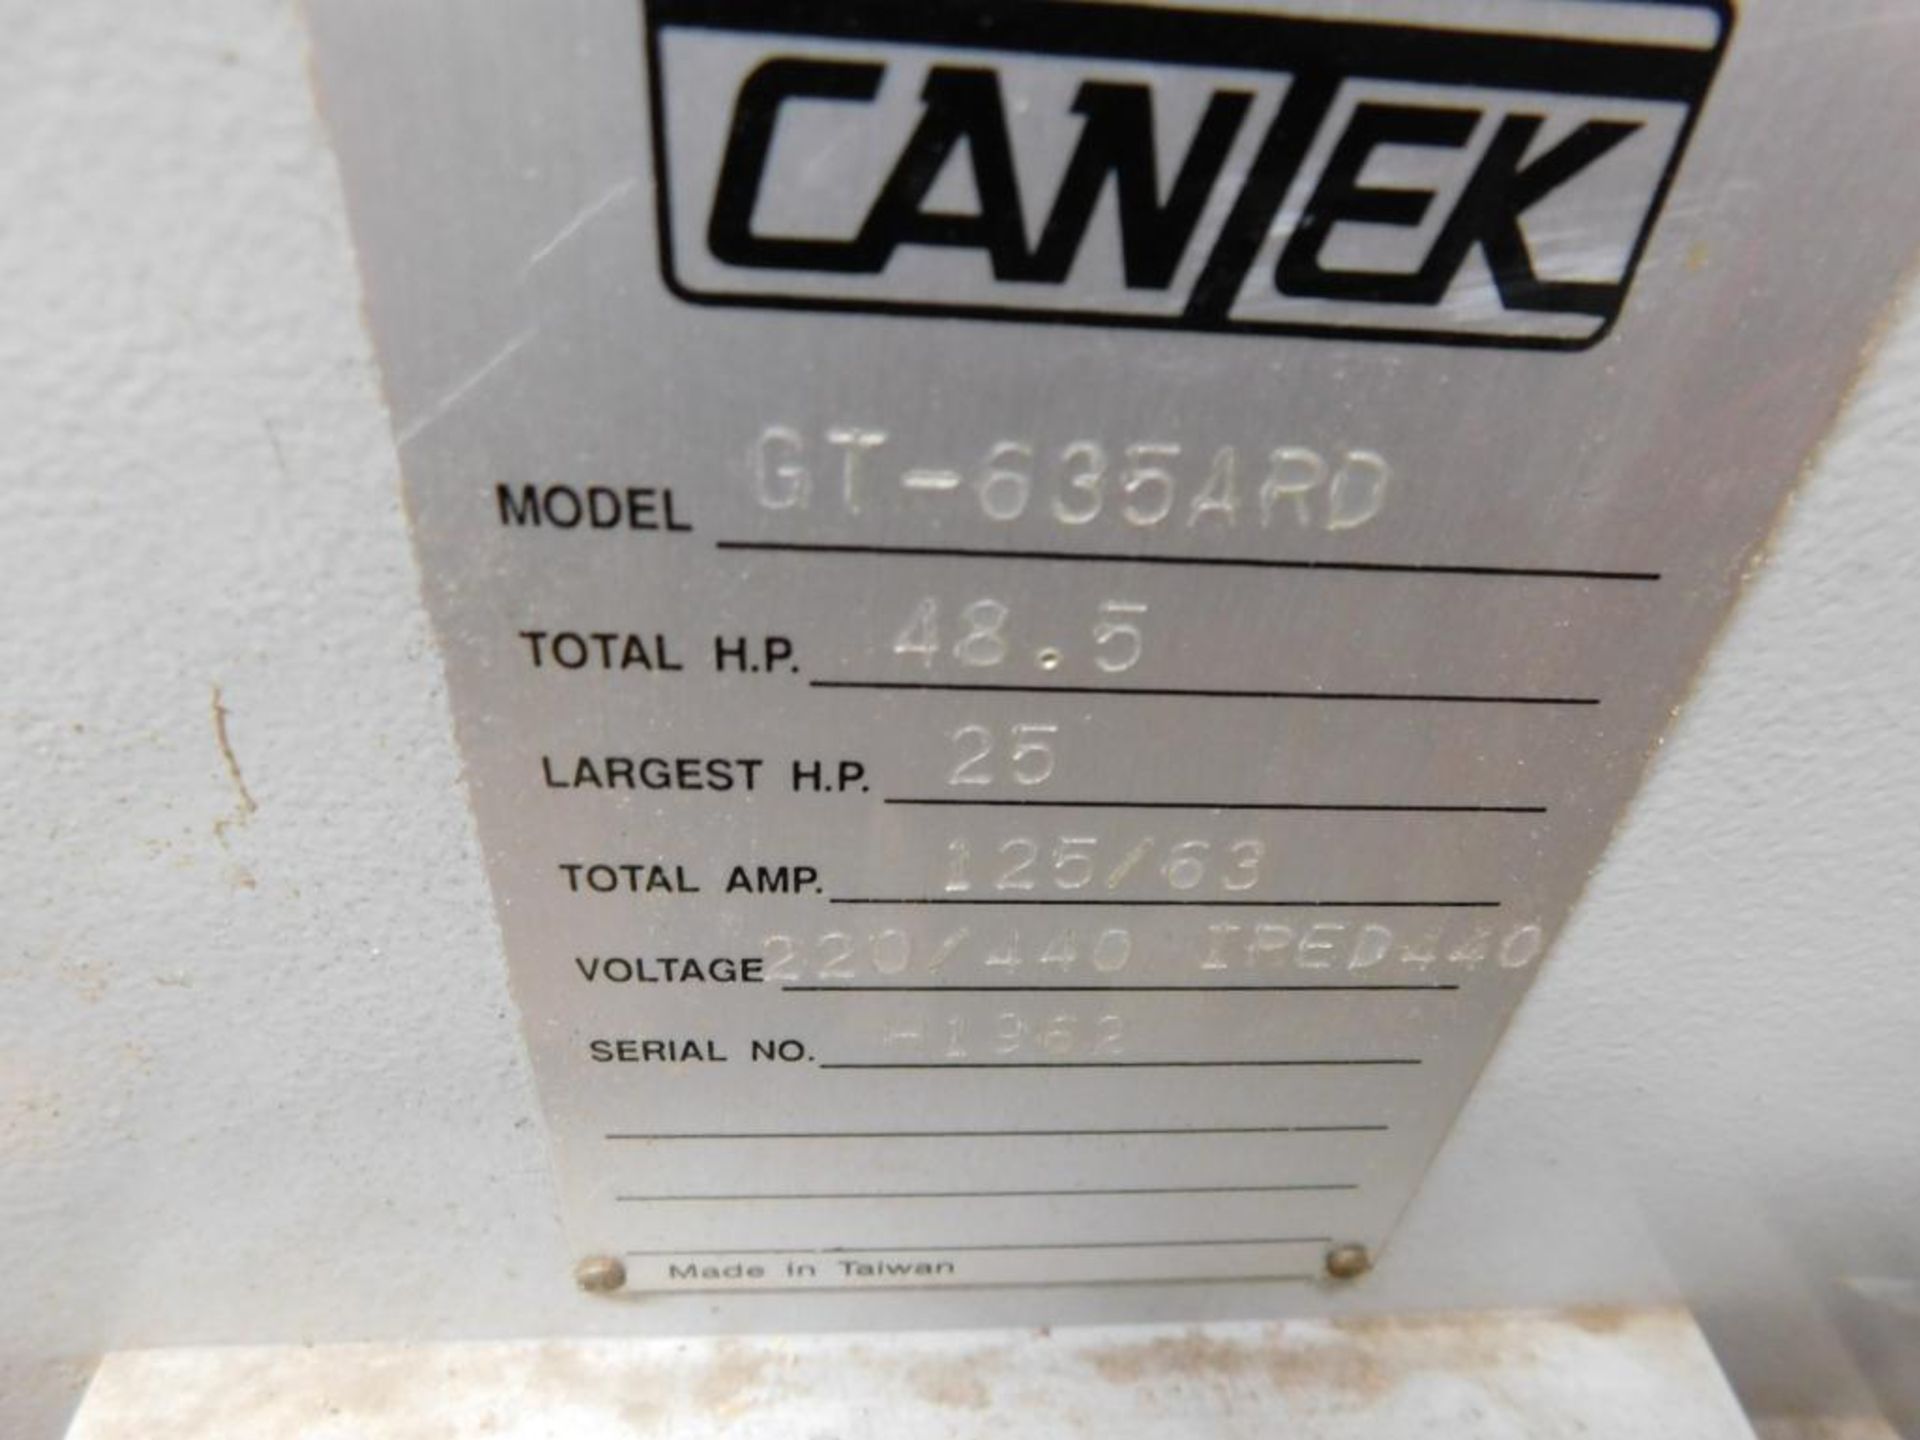 Cantek 25" Double Surface Planer, Model GT-635-ARD, S/N H-1962 (2004), Helical Head, DP525 PLC Contr - Image 11 of 11